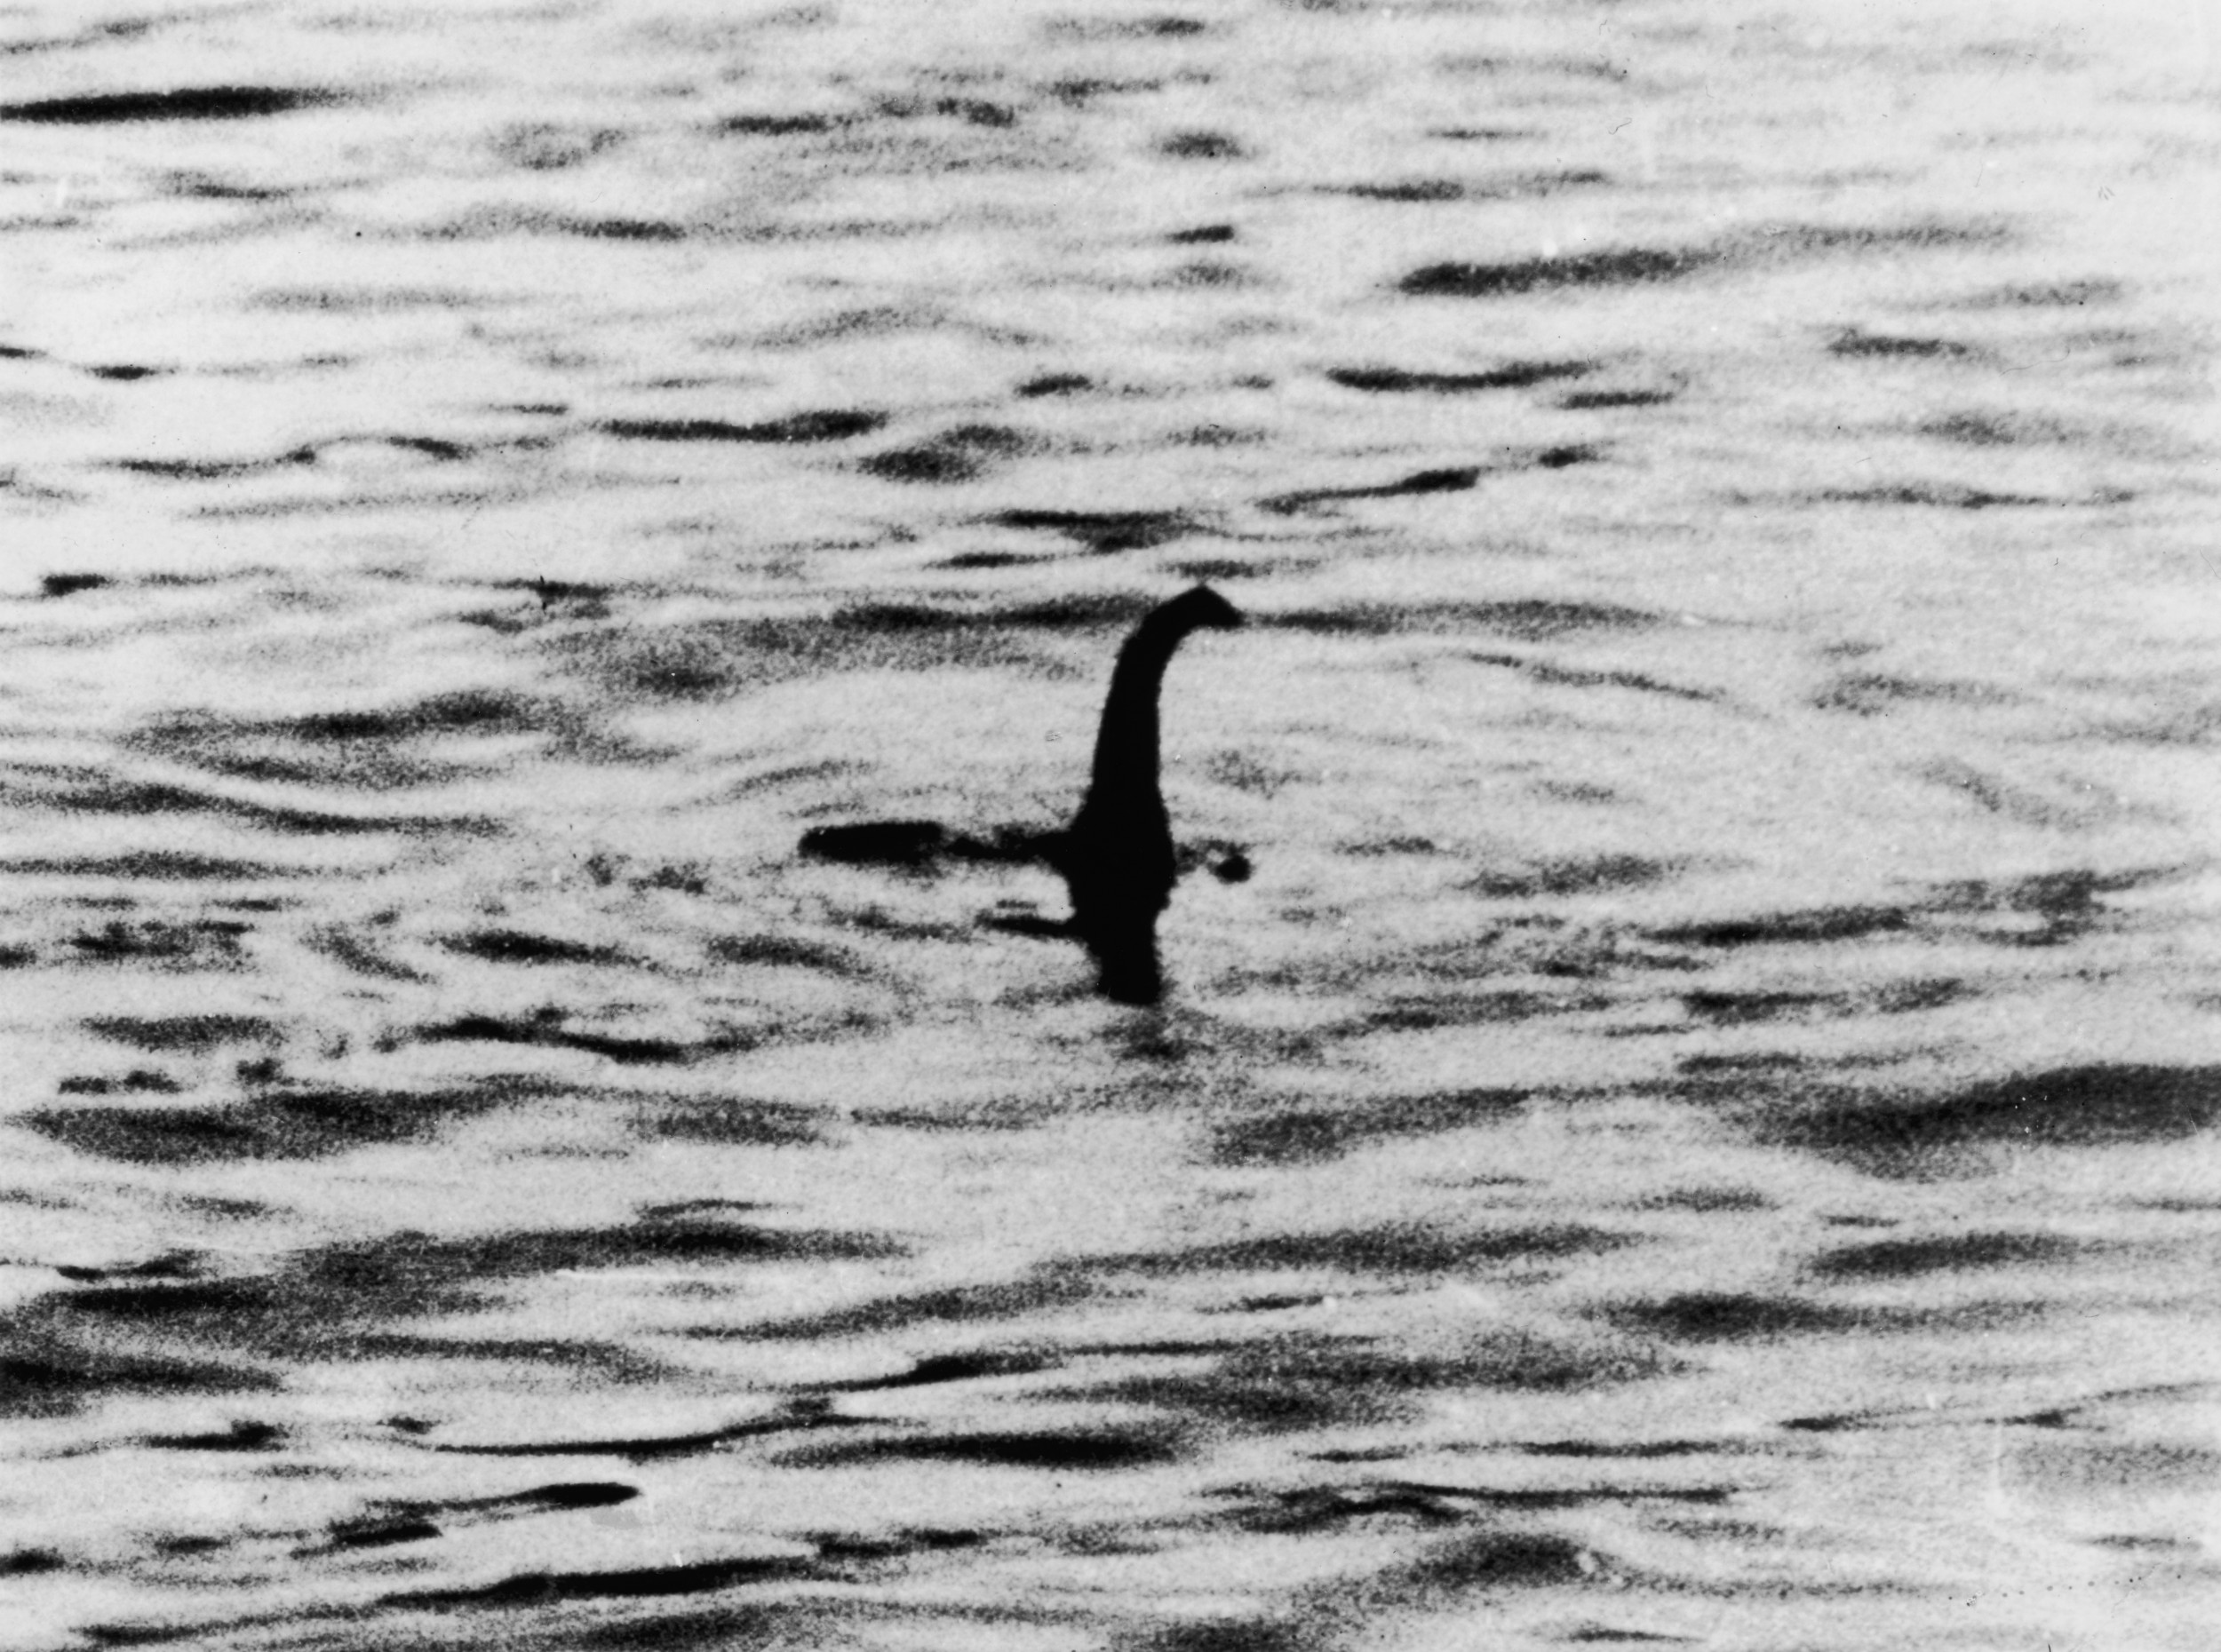 Scientists Reveal the Creature Behind 'Loch Ness Monster' Sightings - Newsweek